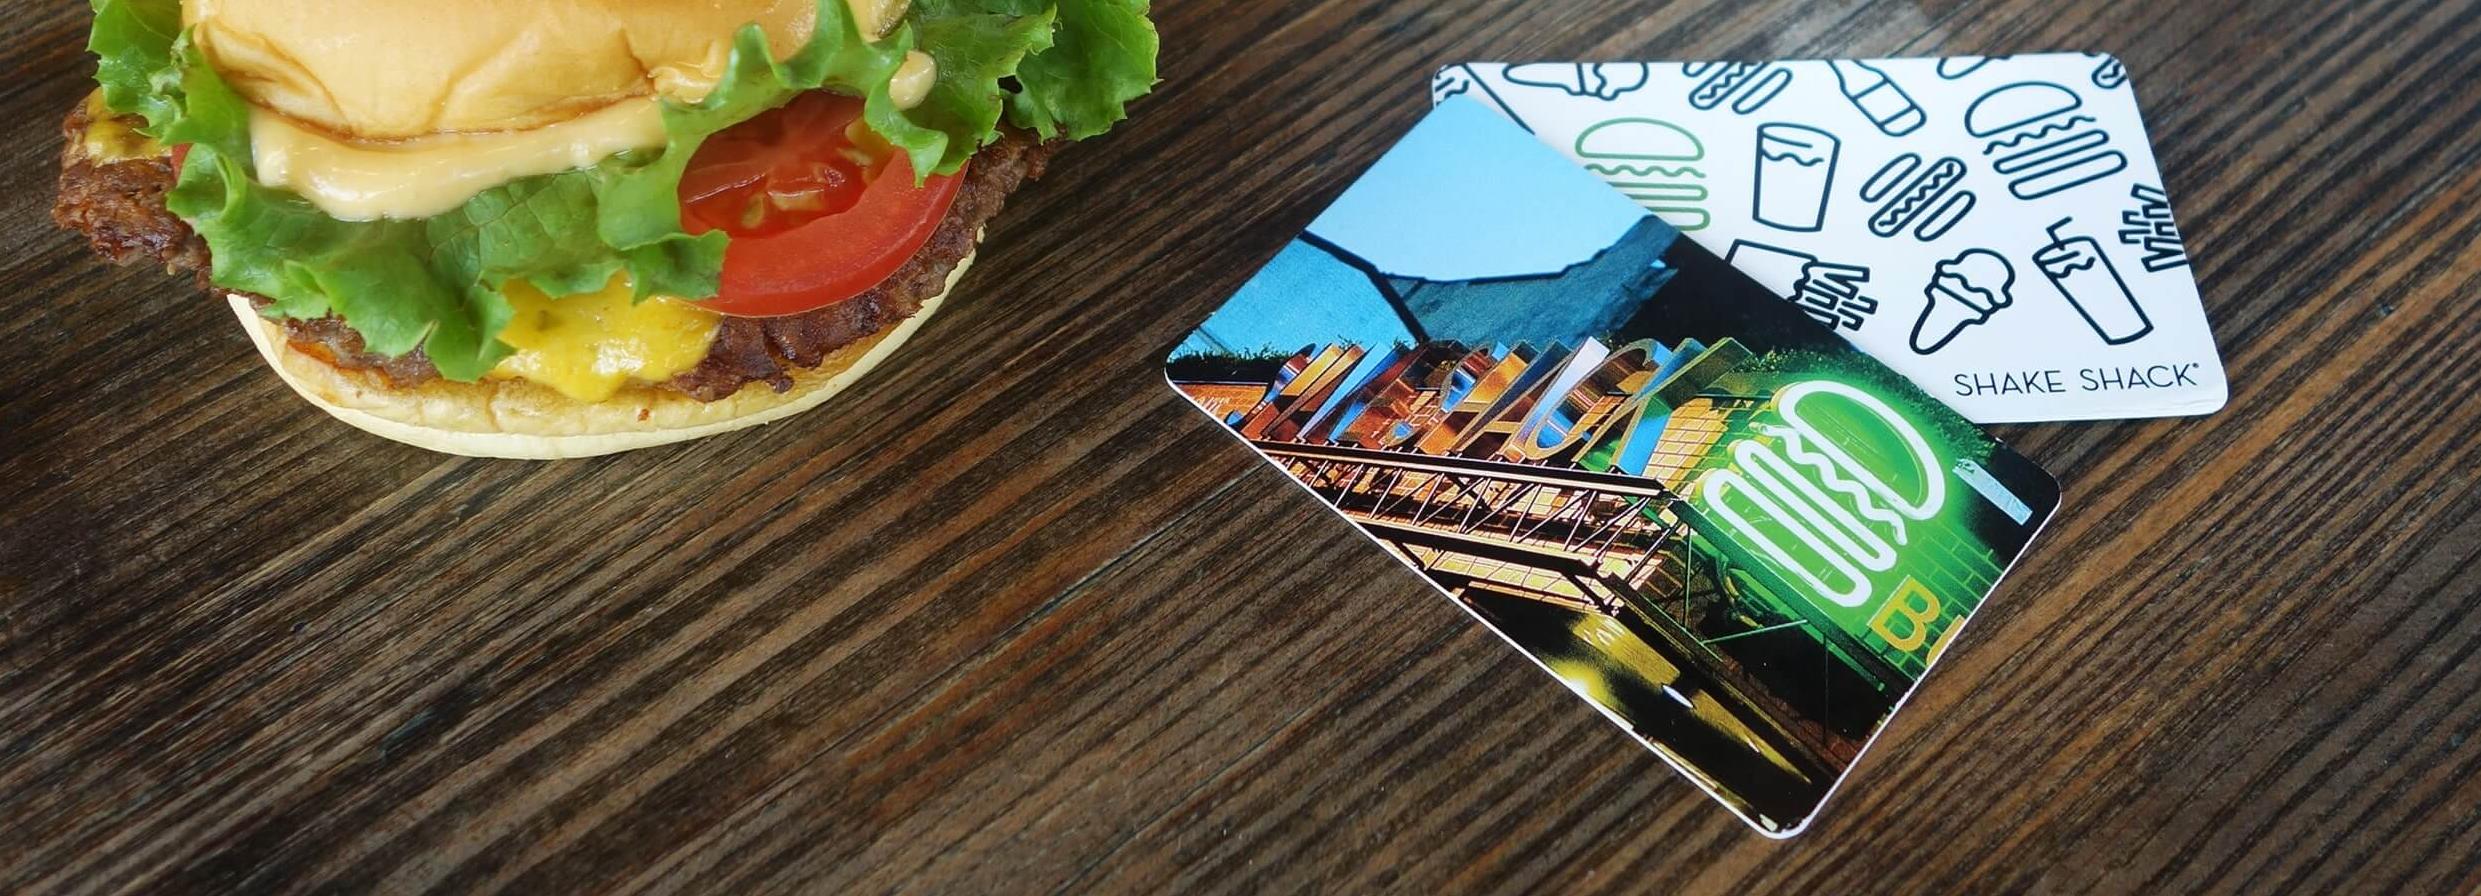 Burger on a table with gift cards next to it